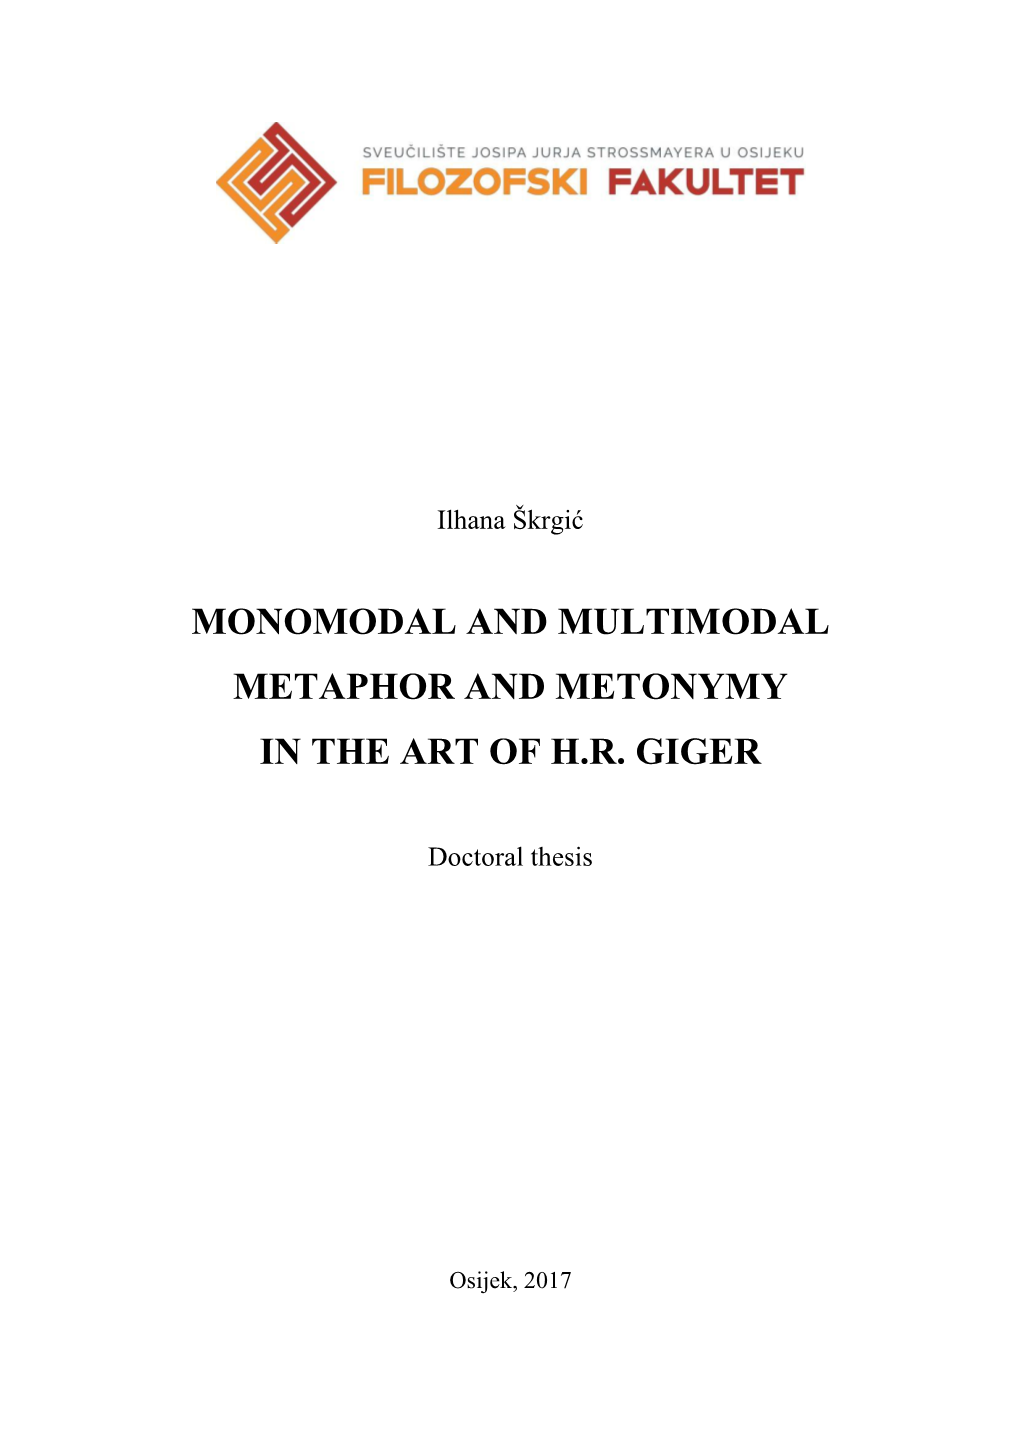 Monomodal and Multimodal Metaphor and Metonymy in the Art of H.R